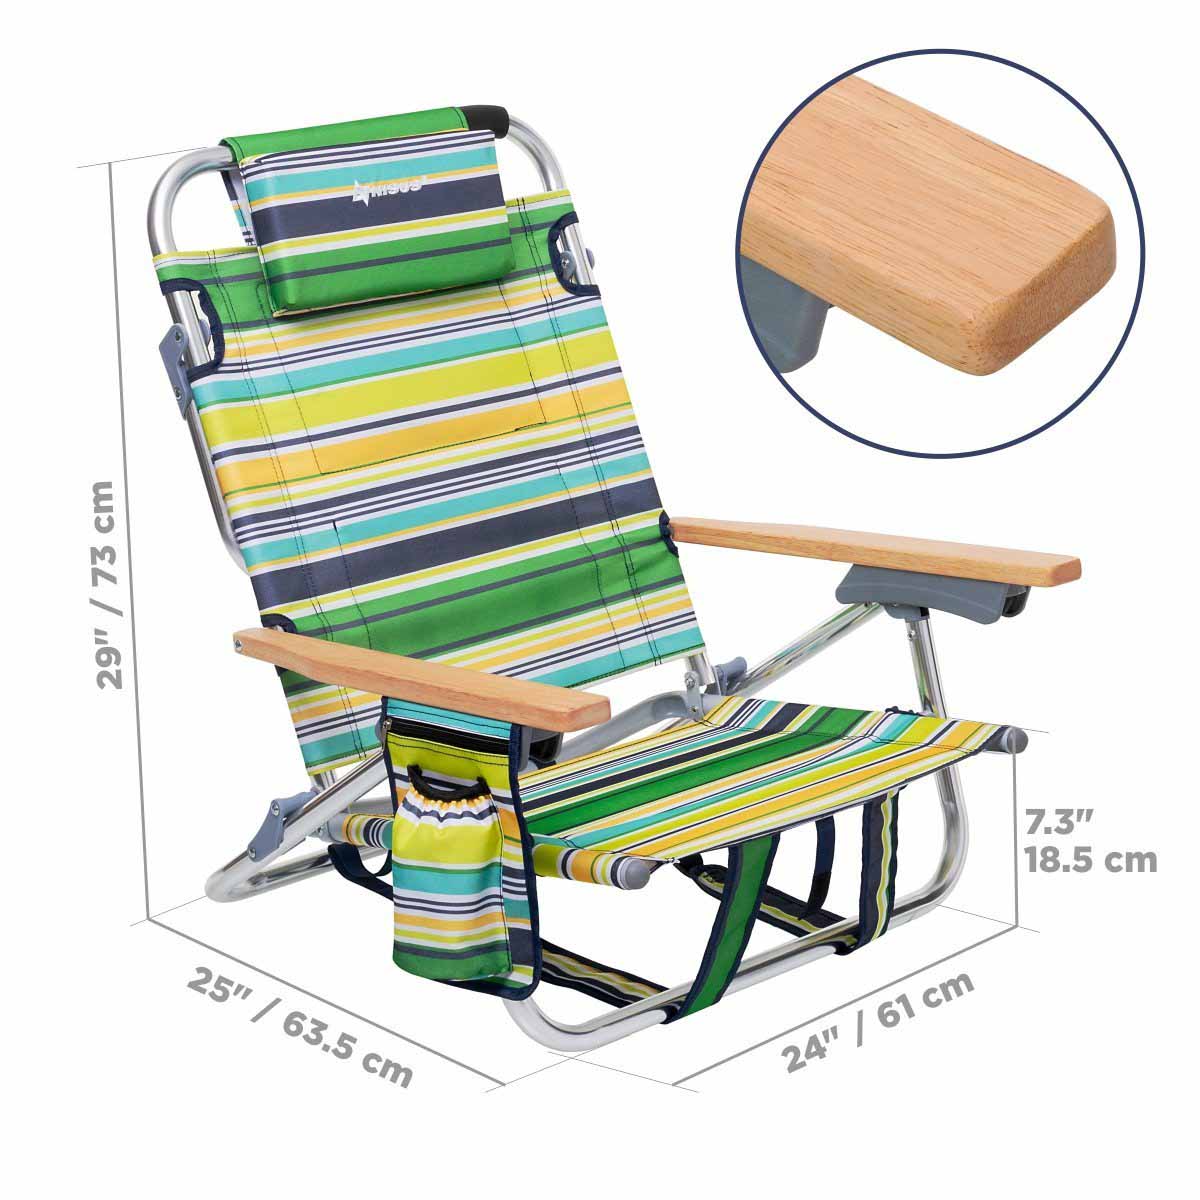 Backpack Beach Chair with Headrest is 29 inches high, 25 inches long, 24 inches wide and 7.3 inches deep, it's equipped with armrest made of wood